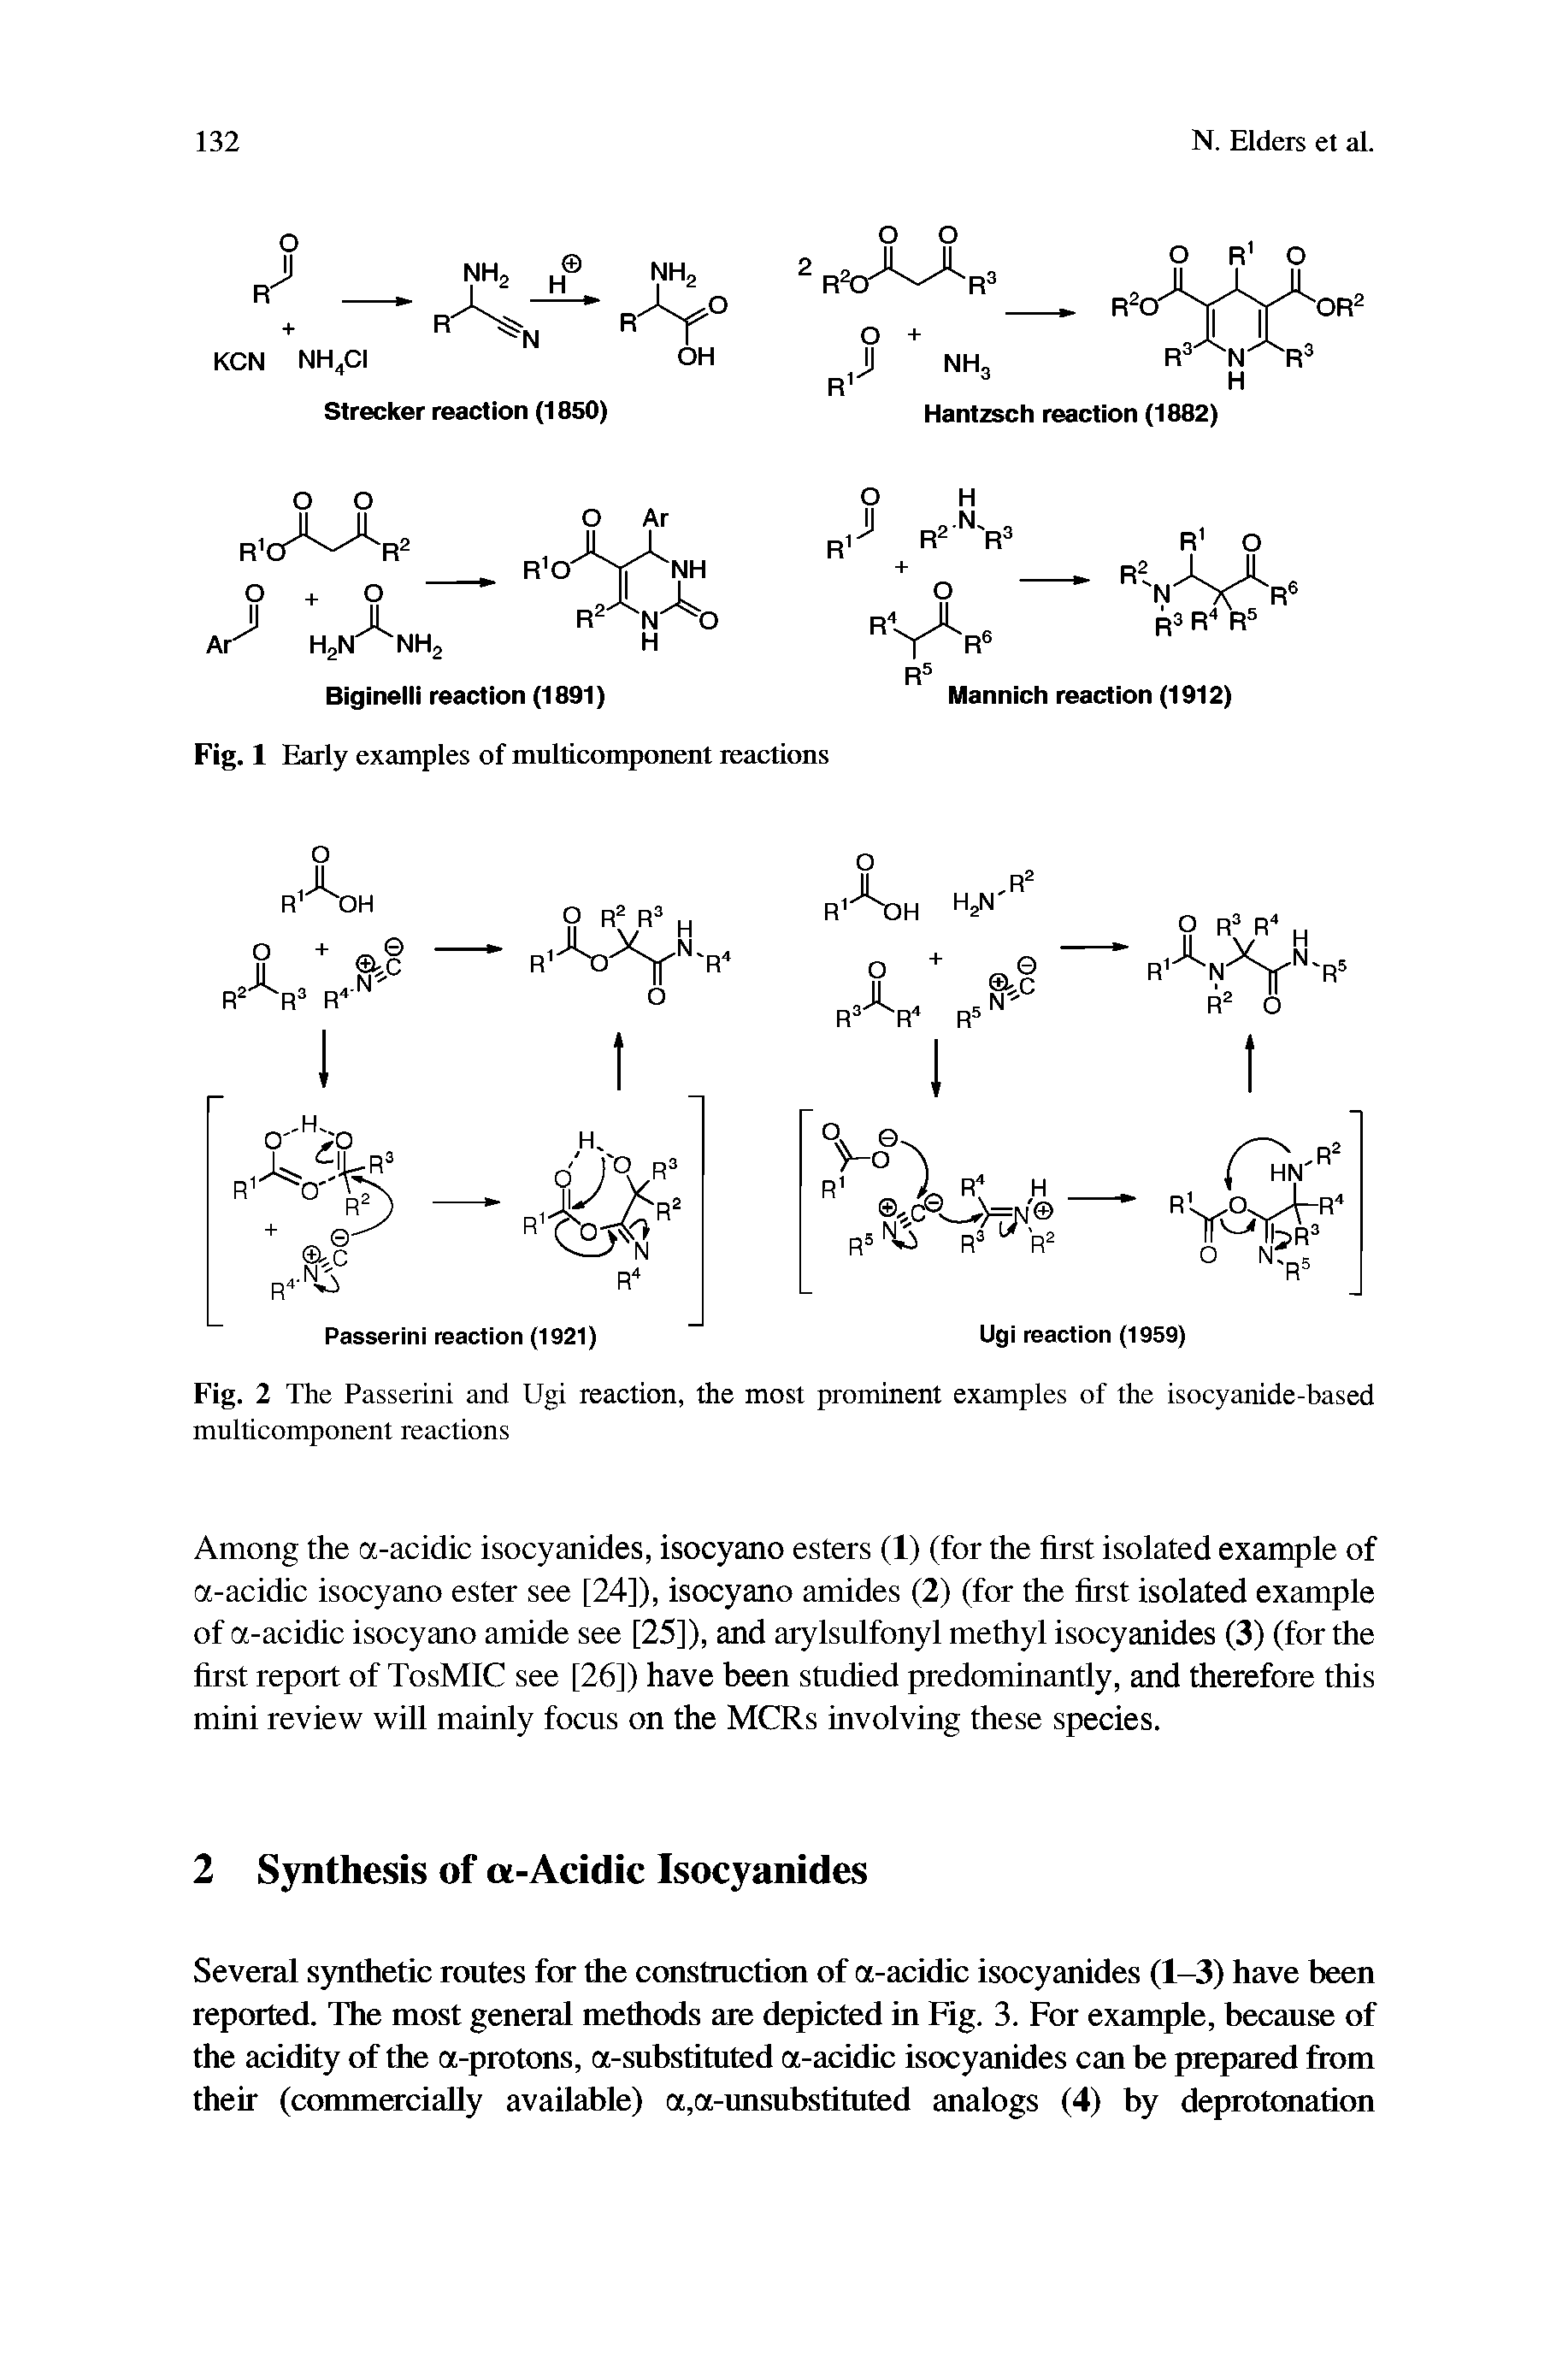 Fig. 2 The Passerini and Ugi reaction, the most prominent examples of the isocyanide-based multicomponent reactions...